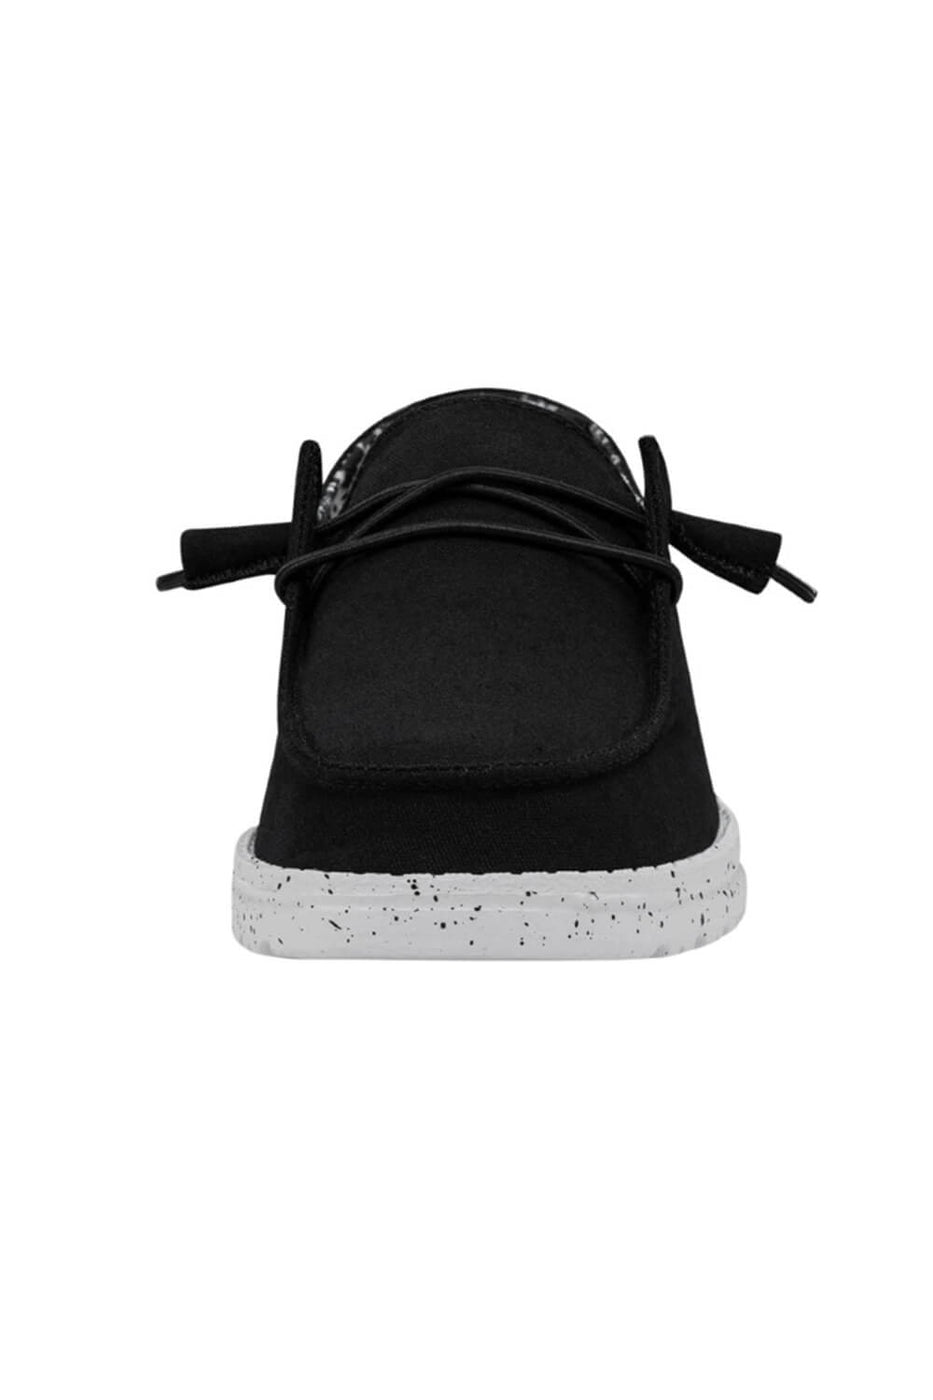 HEYDUDE Women's Wendy Shoes in Black Odyssey (NEW LOGO)